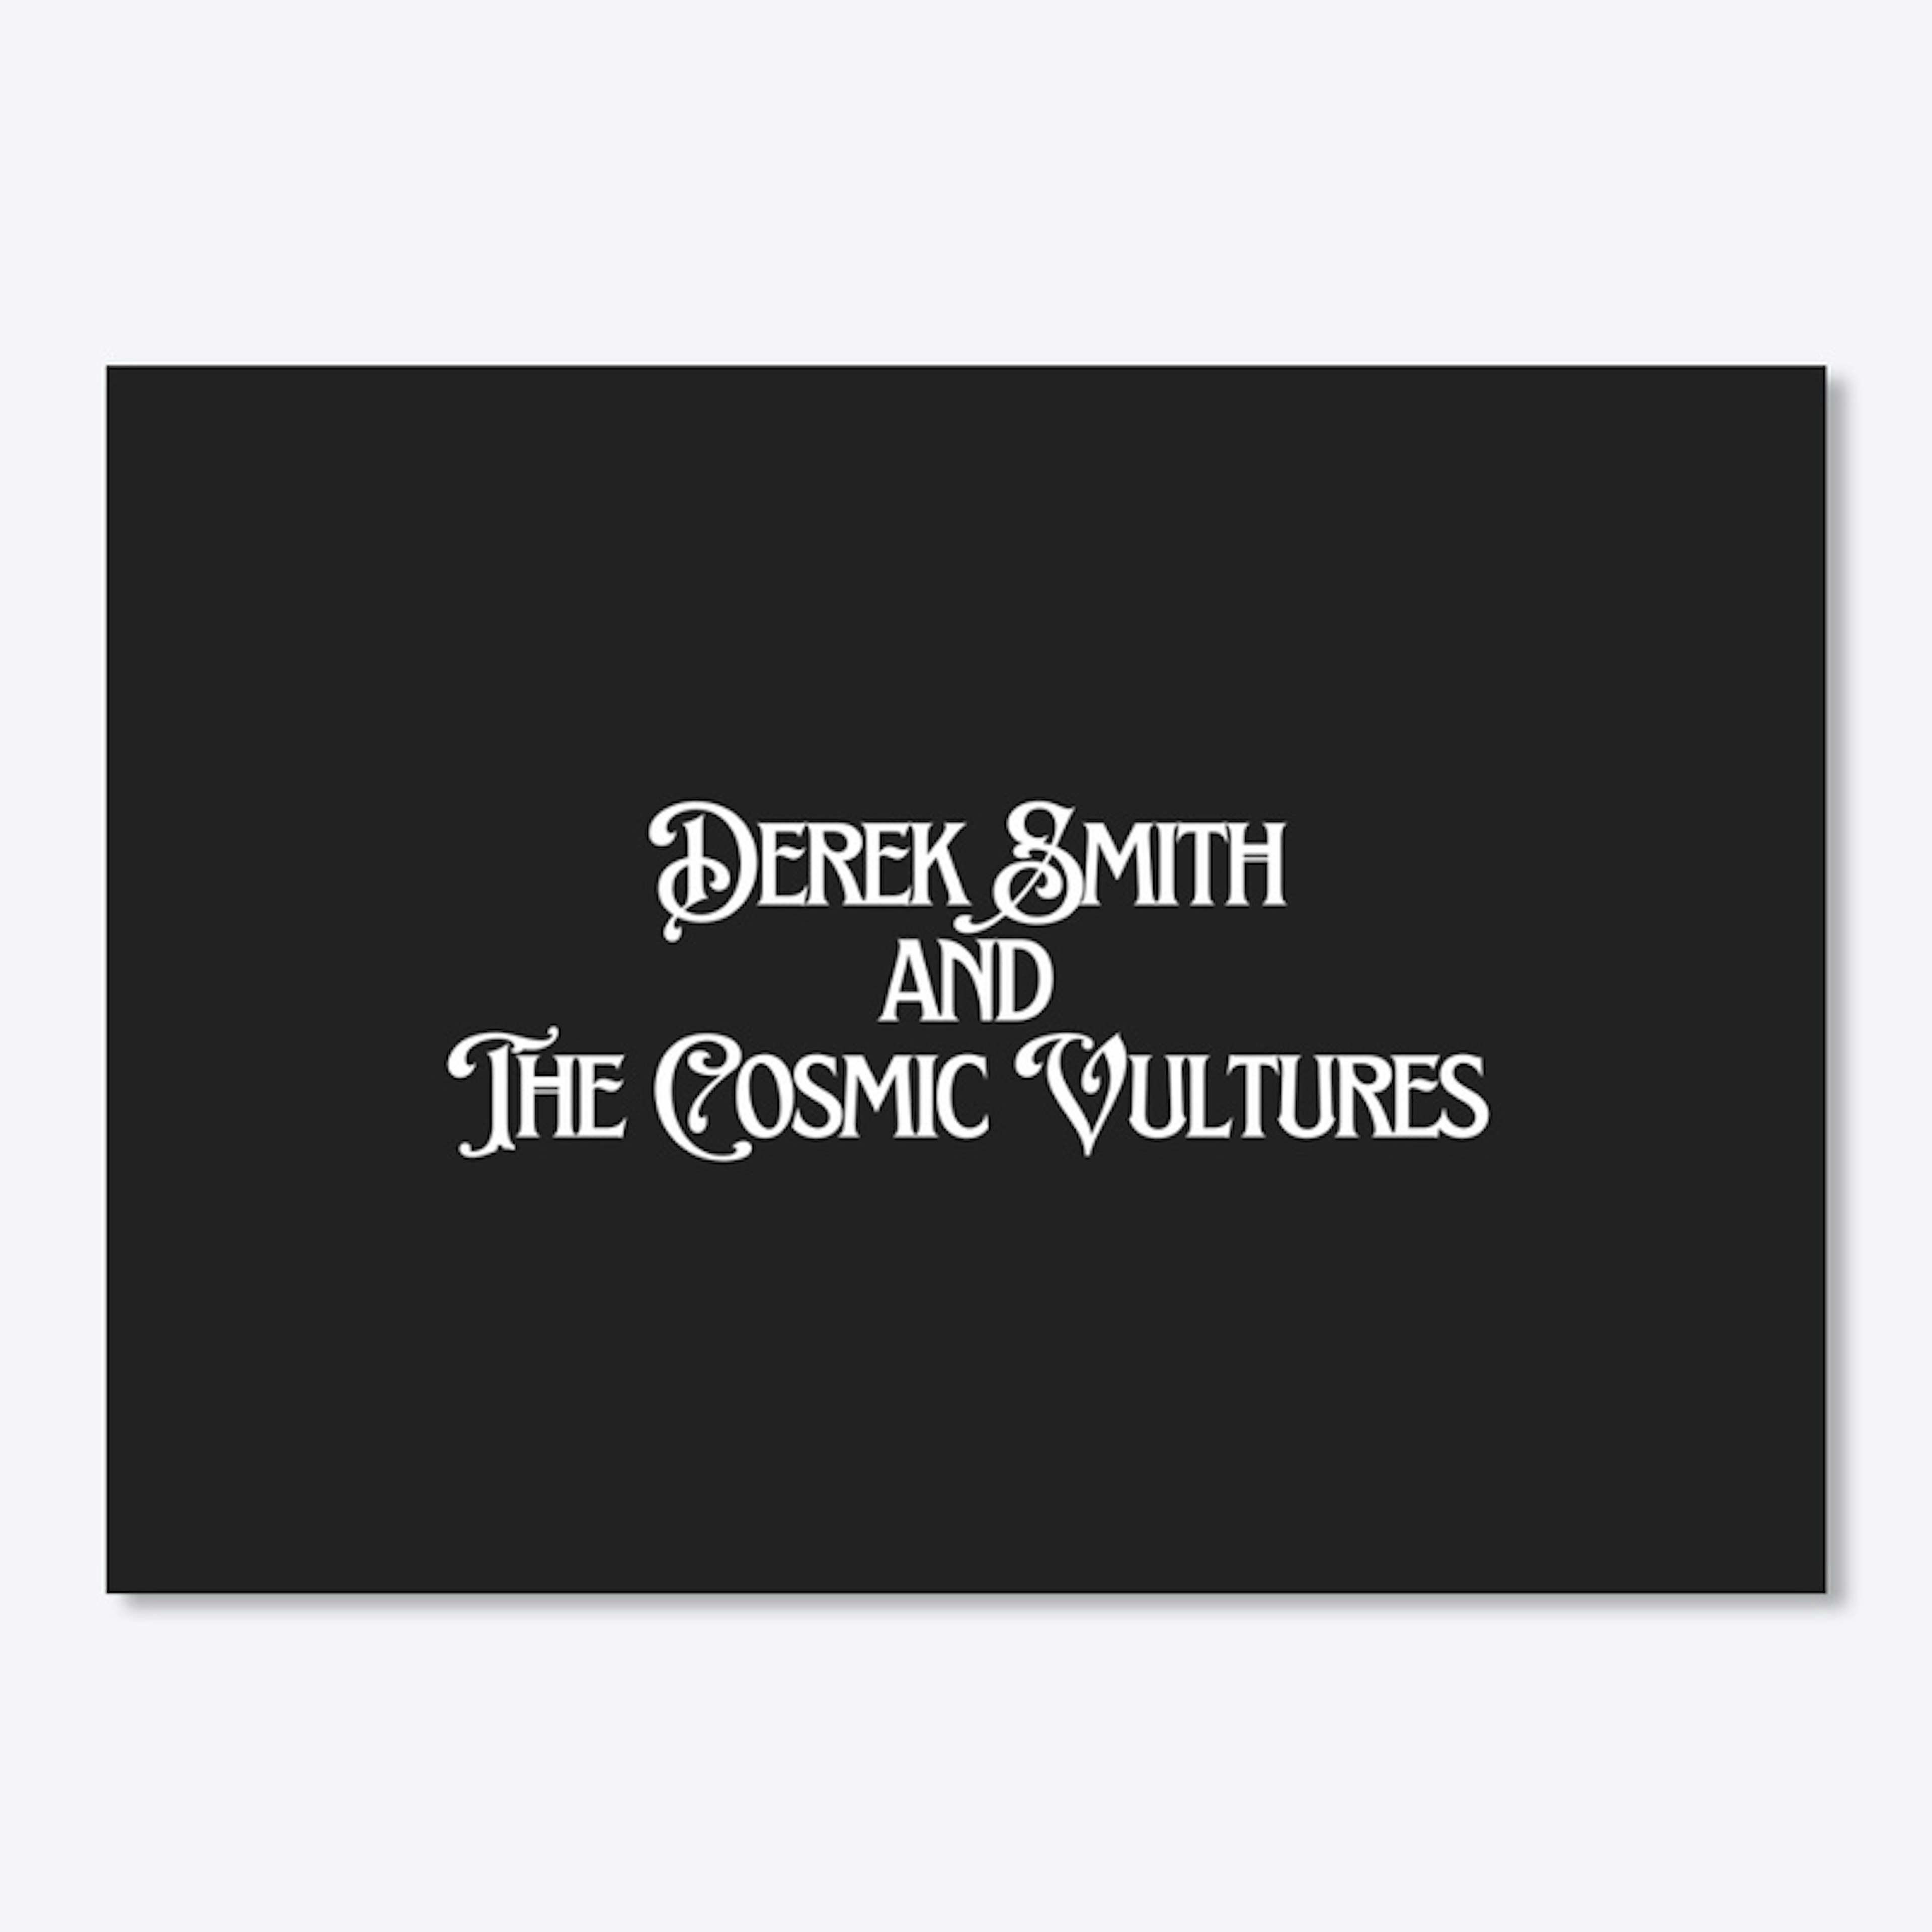 Derek Smith And the Cosmic Vultures